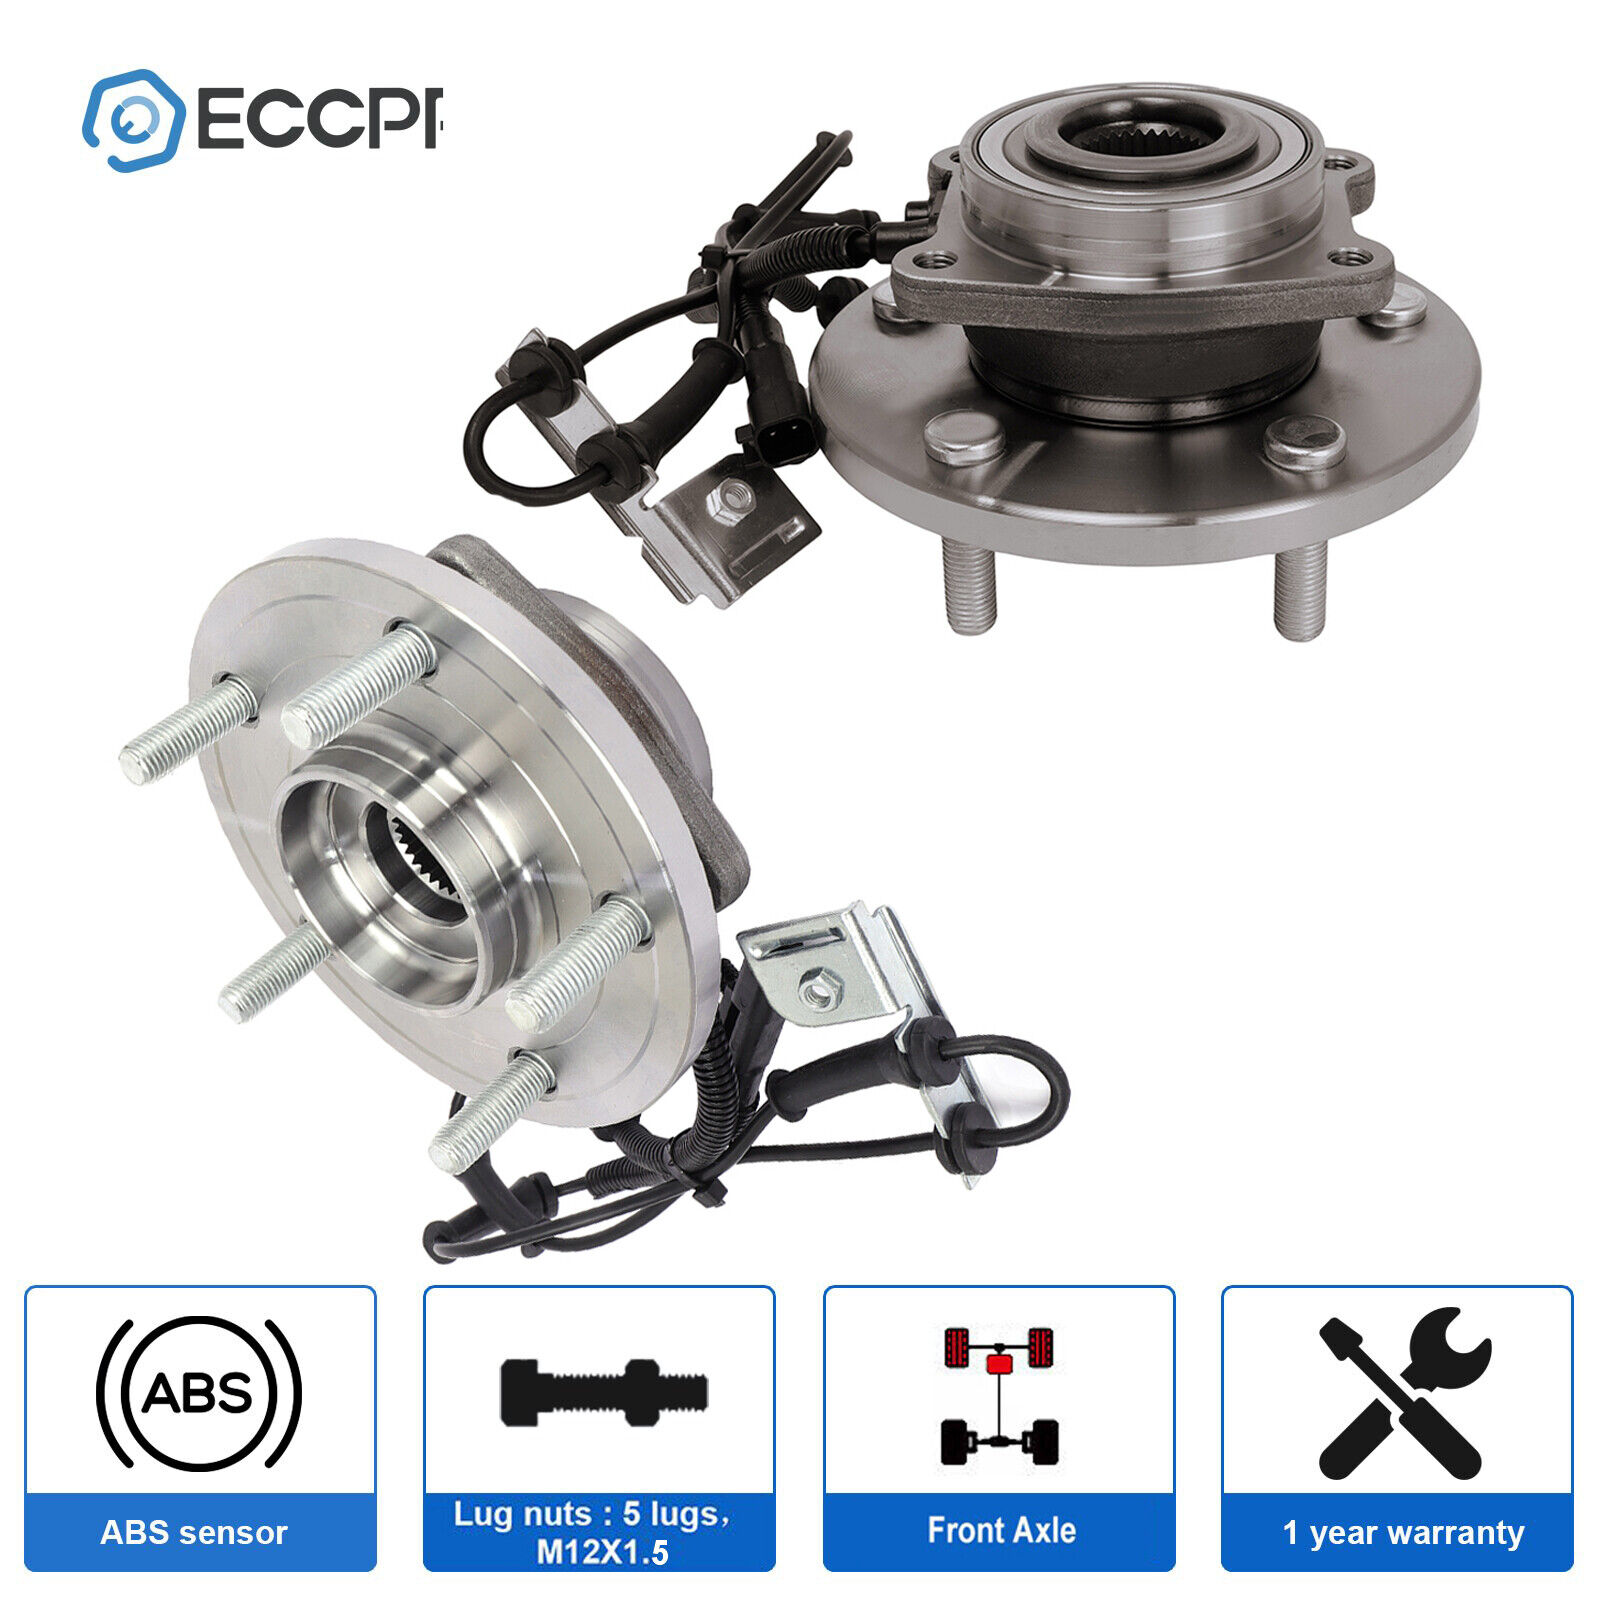 ECCPP 2X Wheel Hub Bearing Assembly Front For Chrysler Town & Country 2008-2016